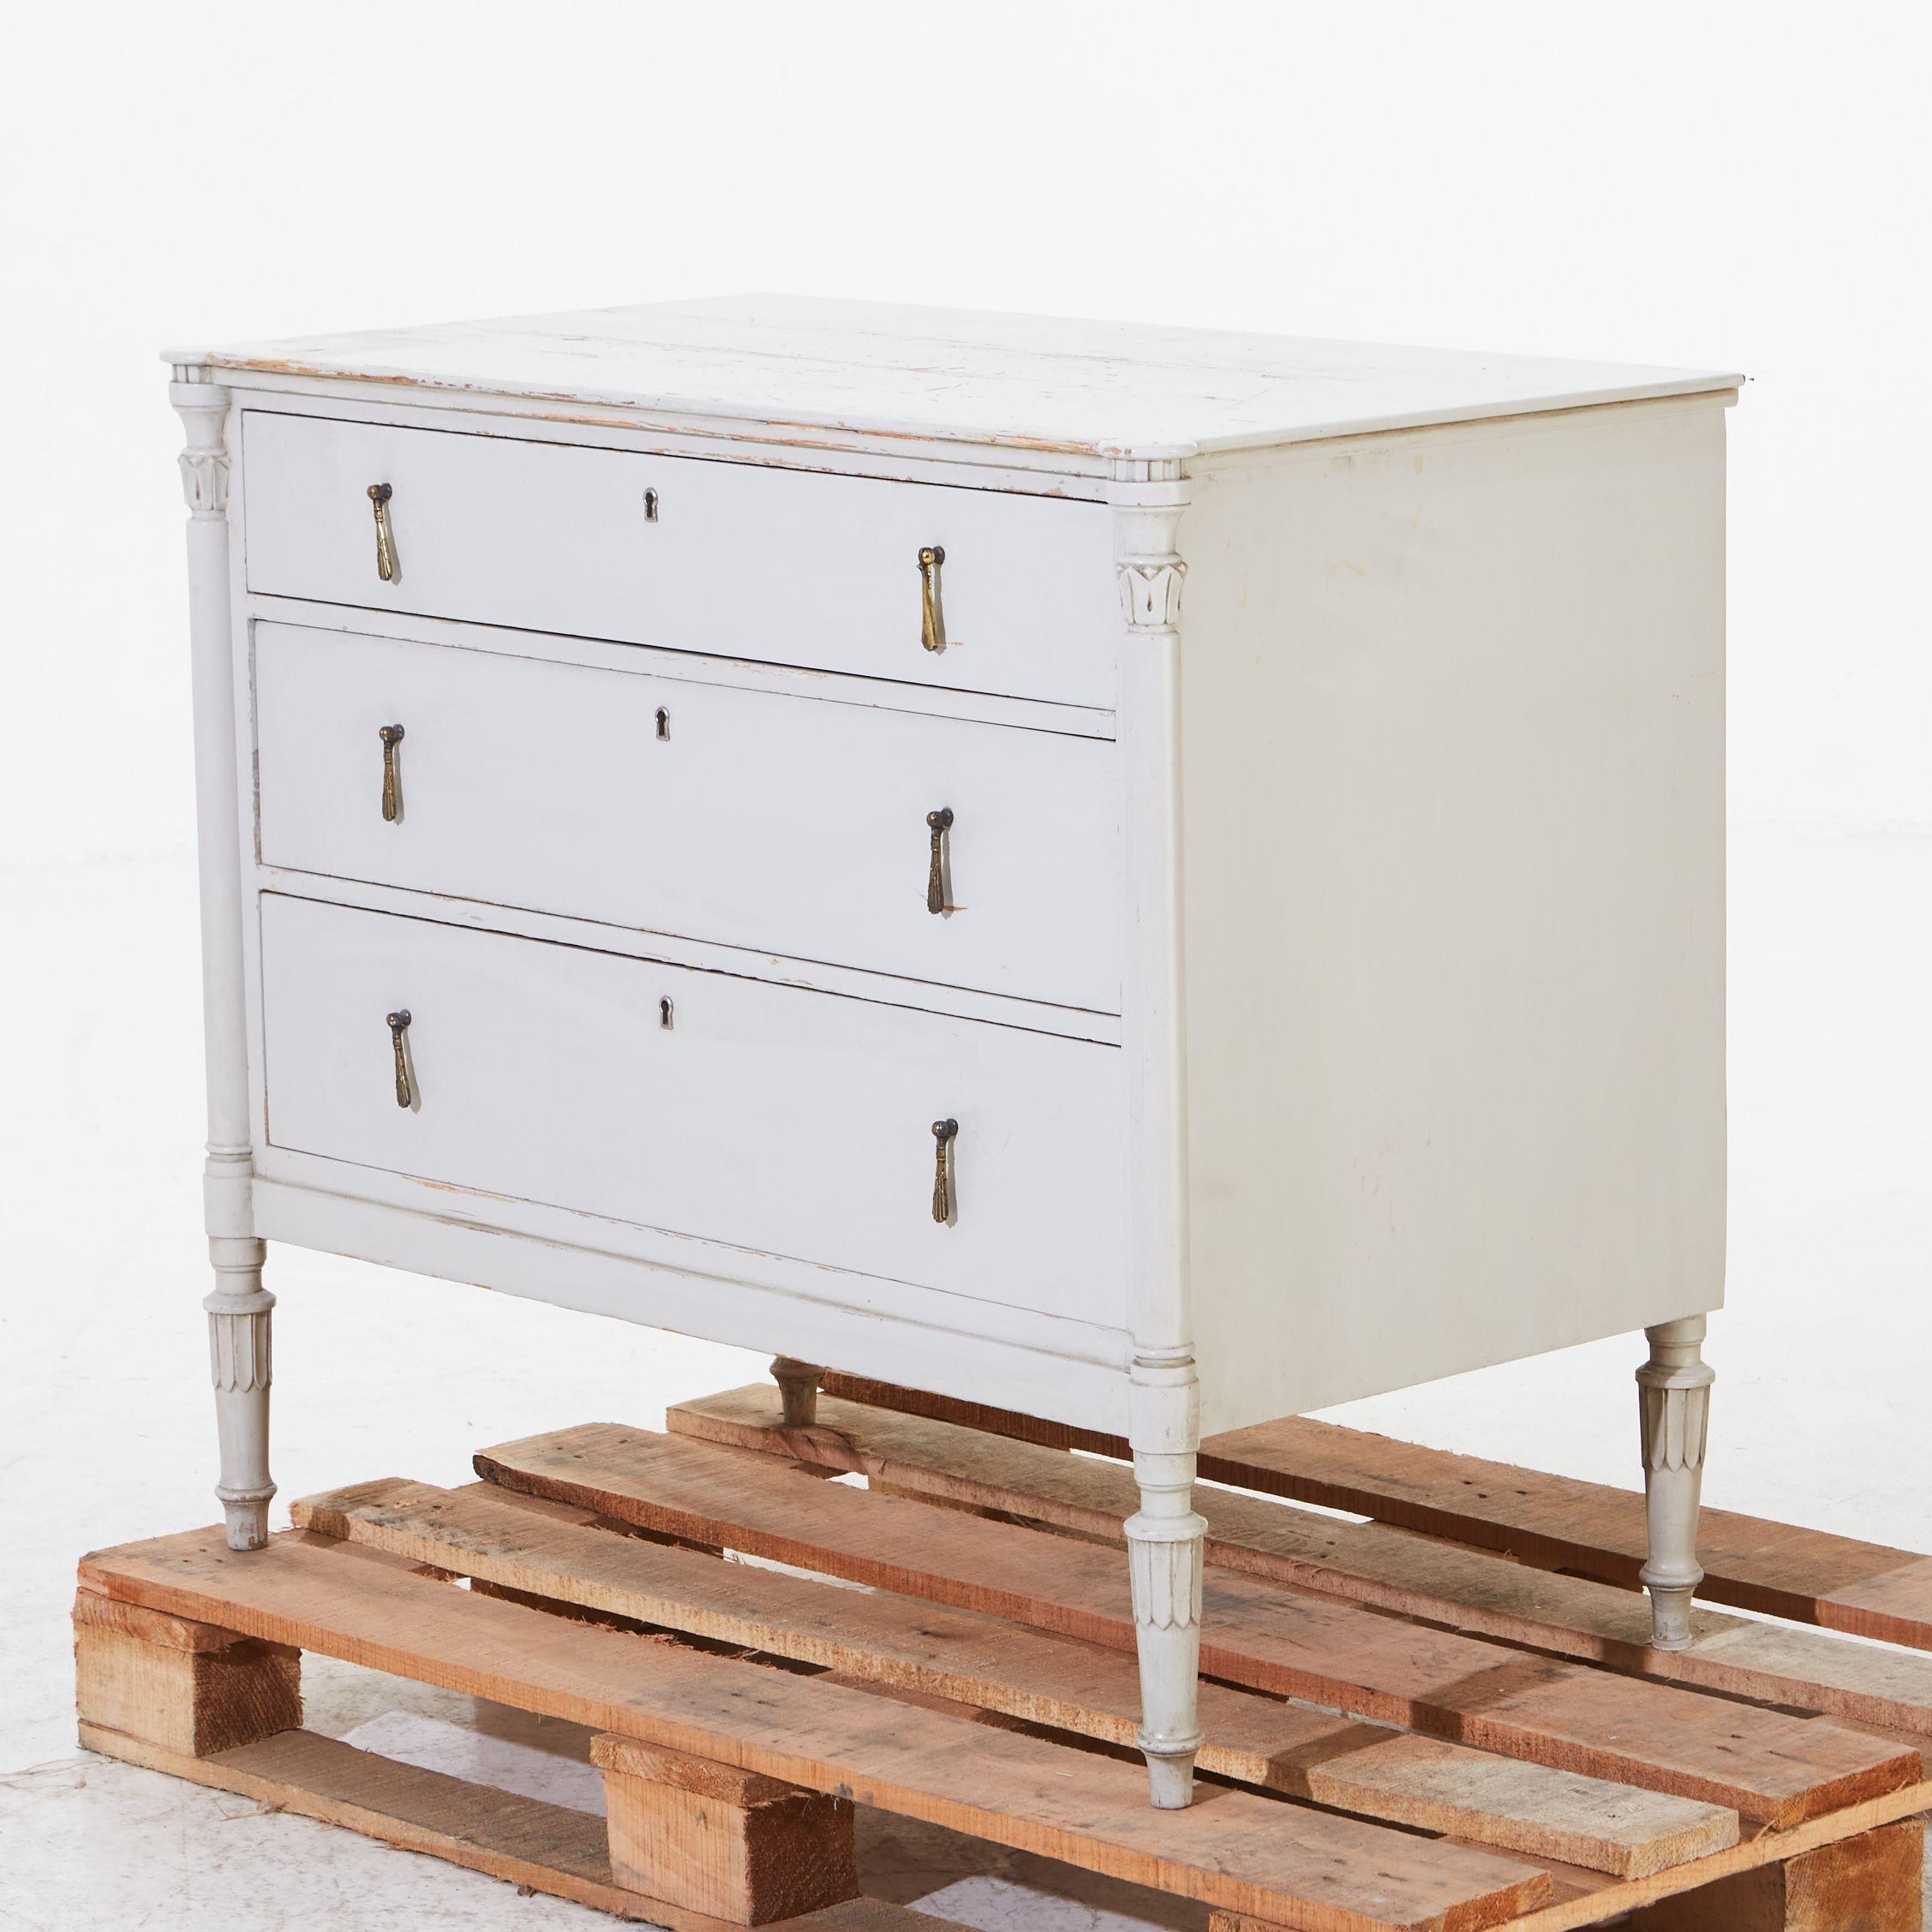 20th Century Grey Painted Gustavian Bureau with Three Drawers, Carved Legs & Brass Hardware For Sale